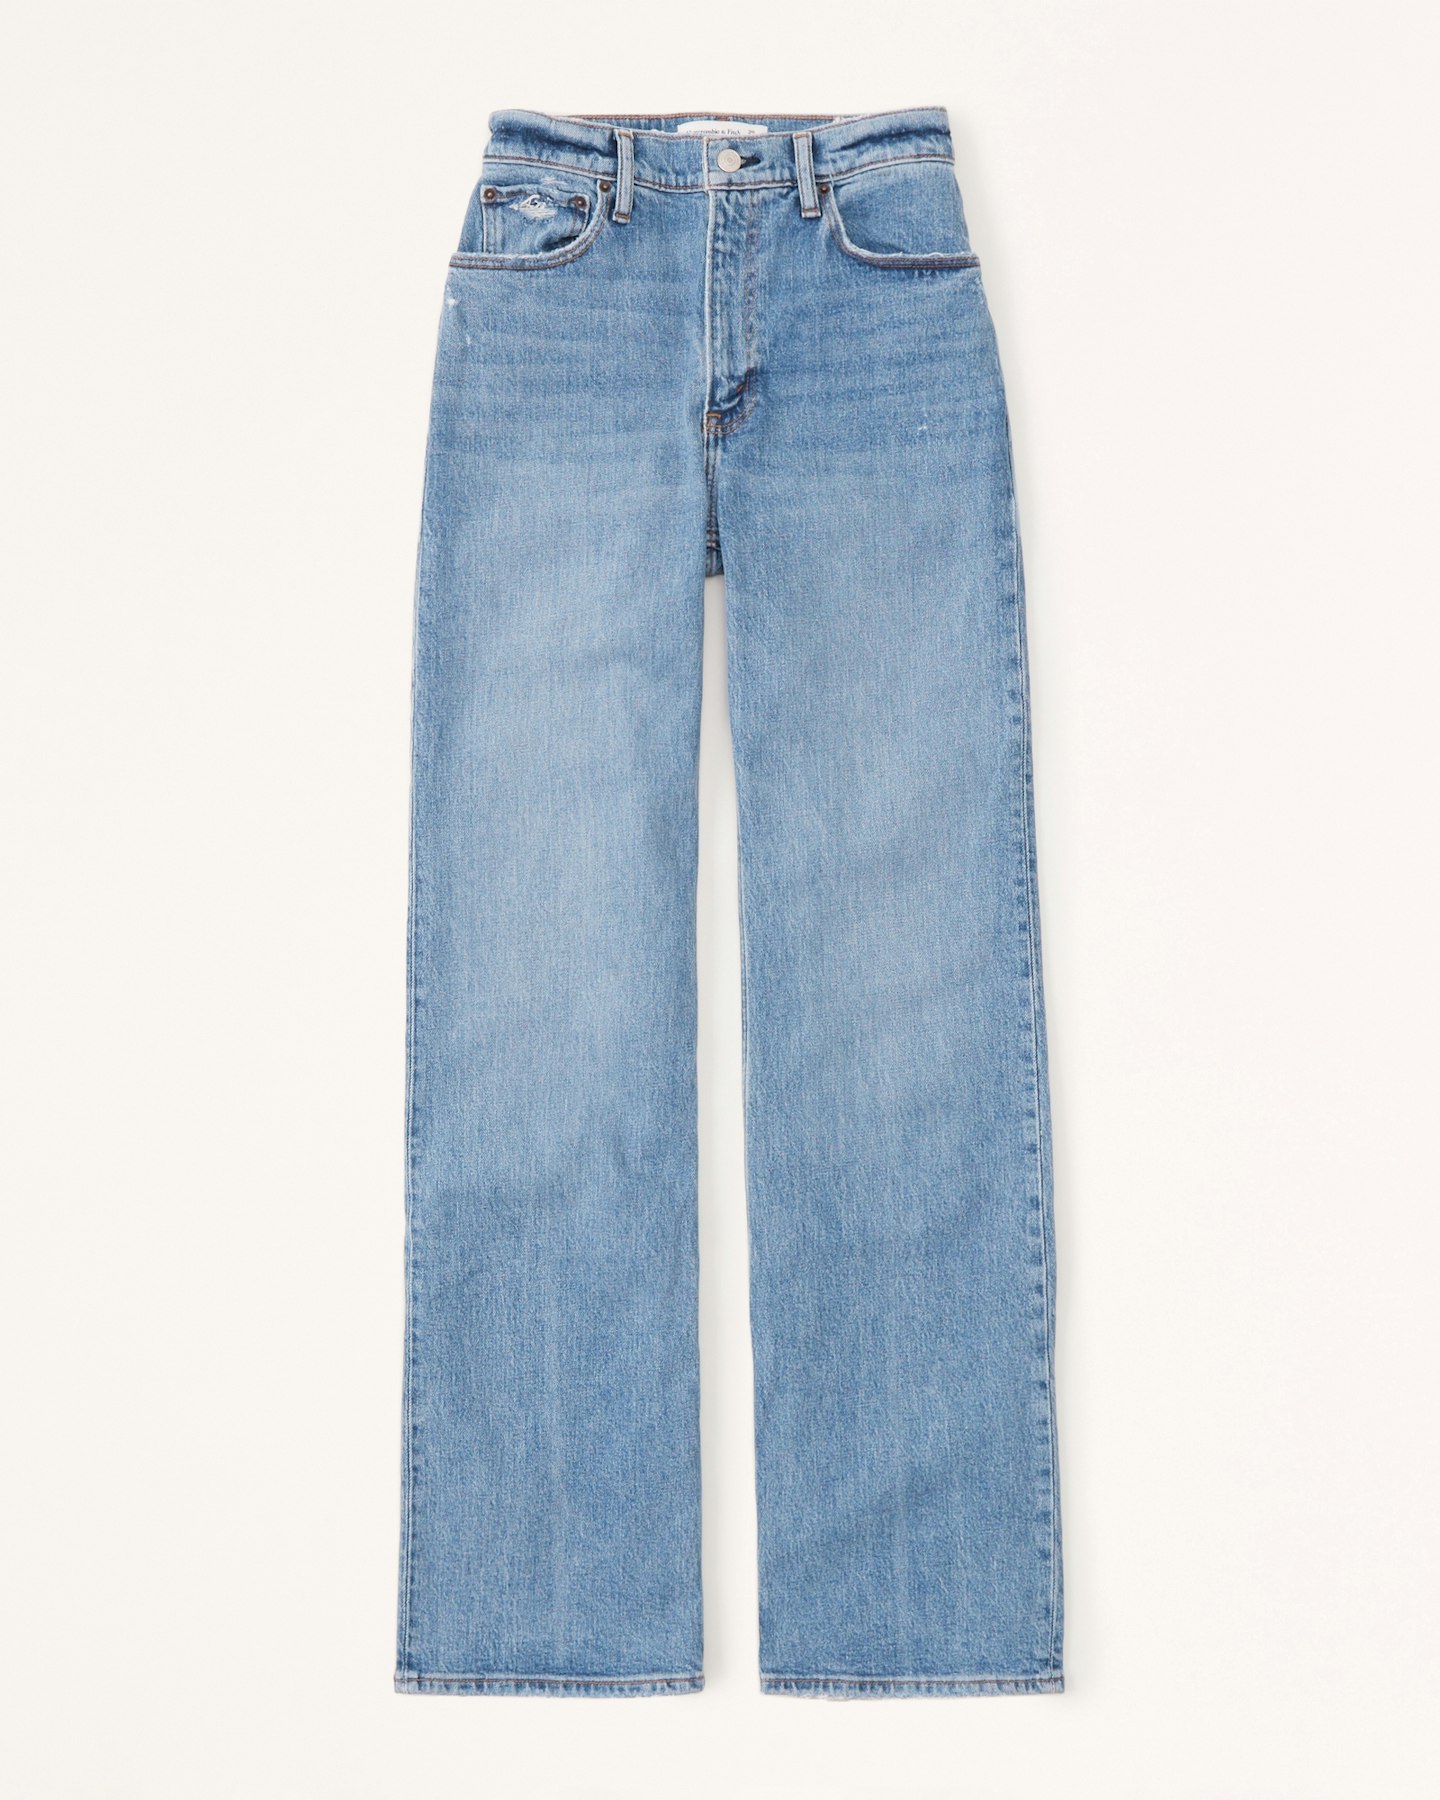 Abercrombie &Fitch, High Rise 90s Relaxed Jean